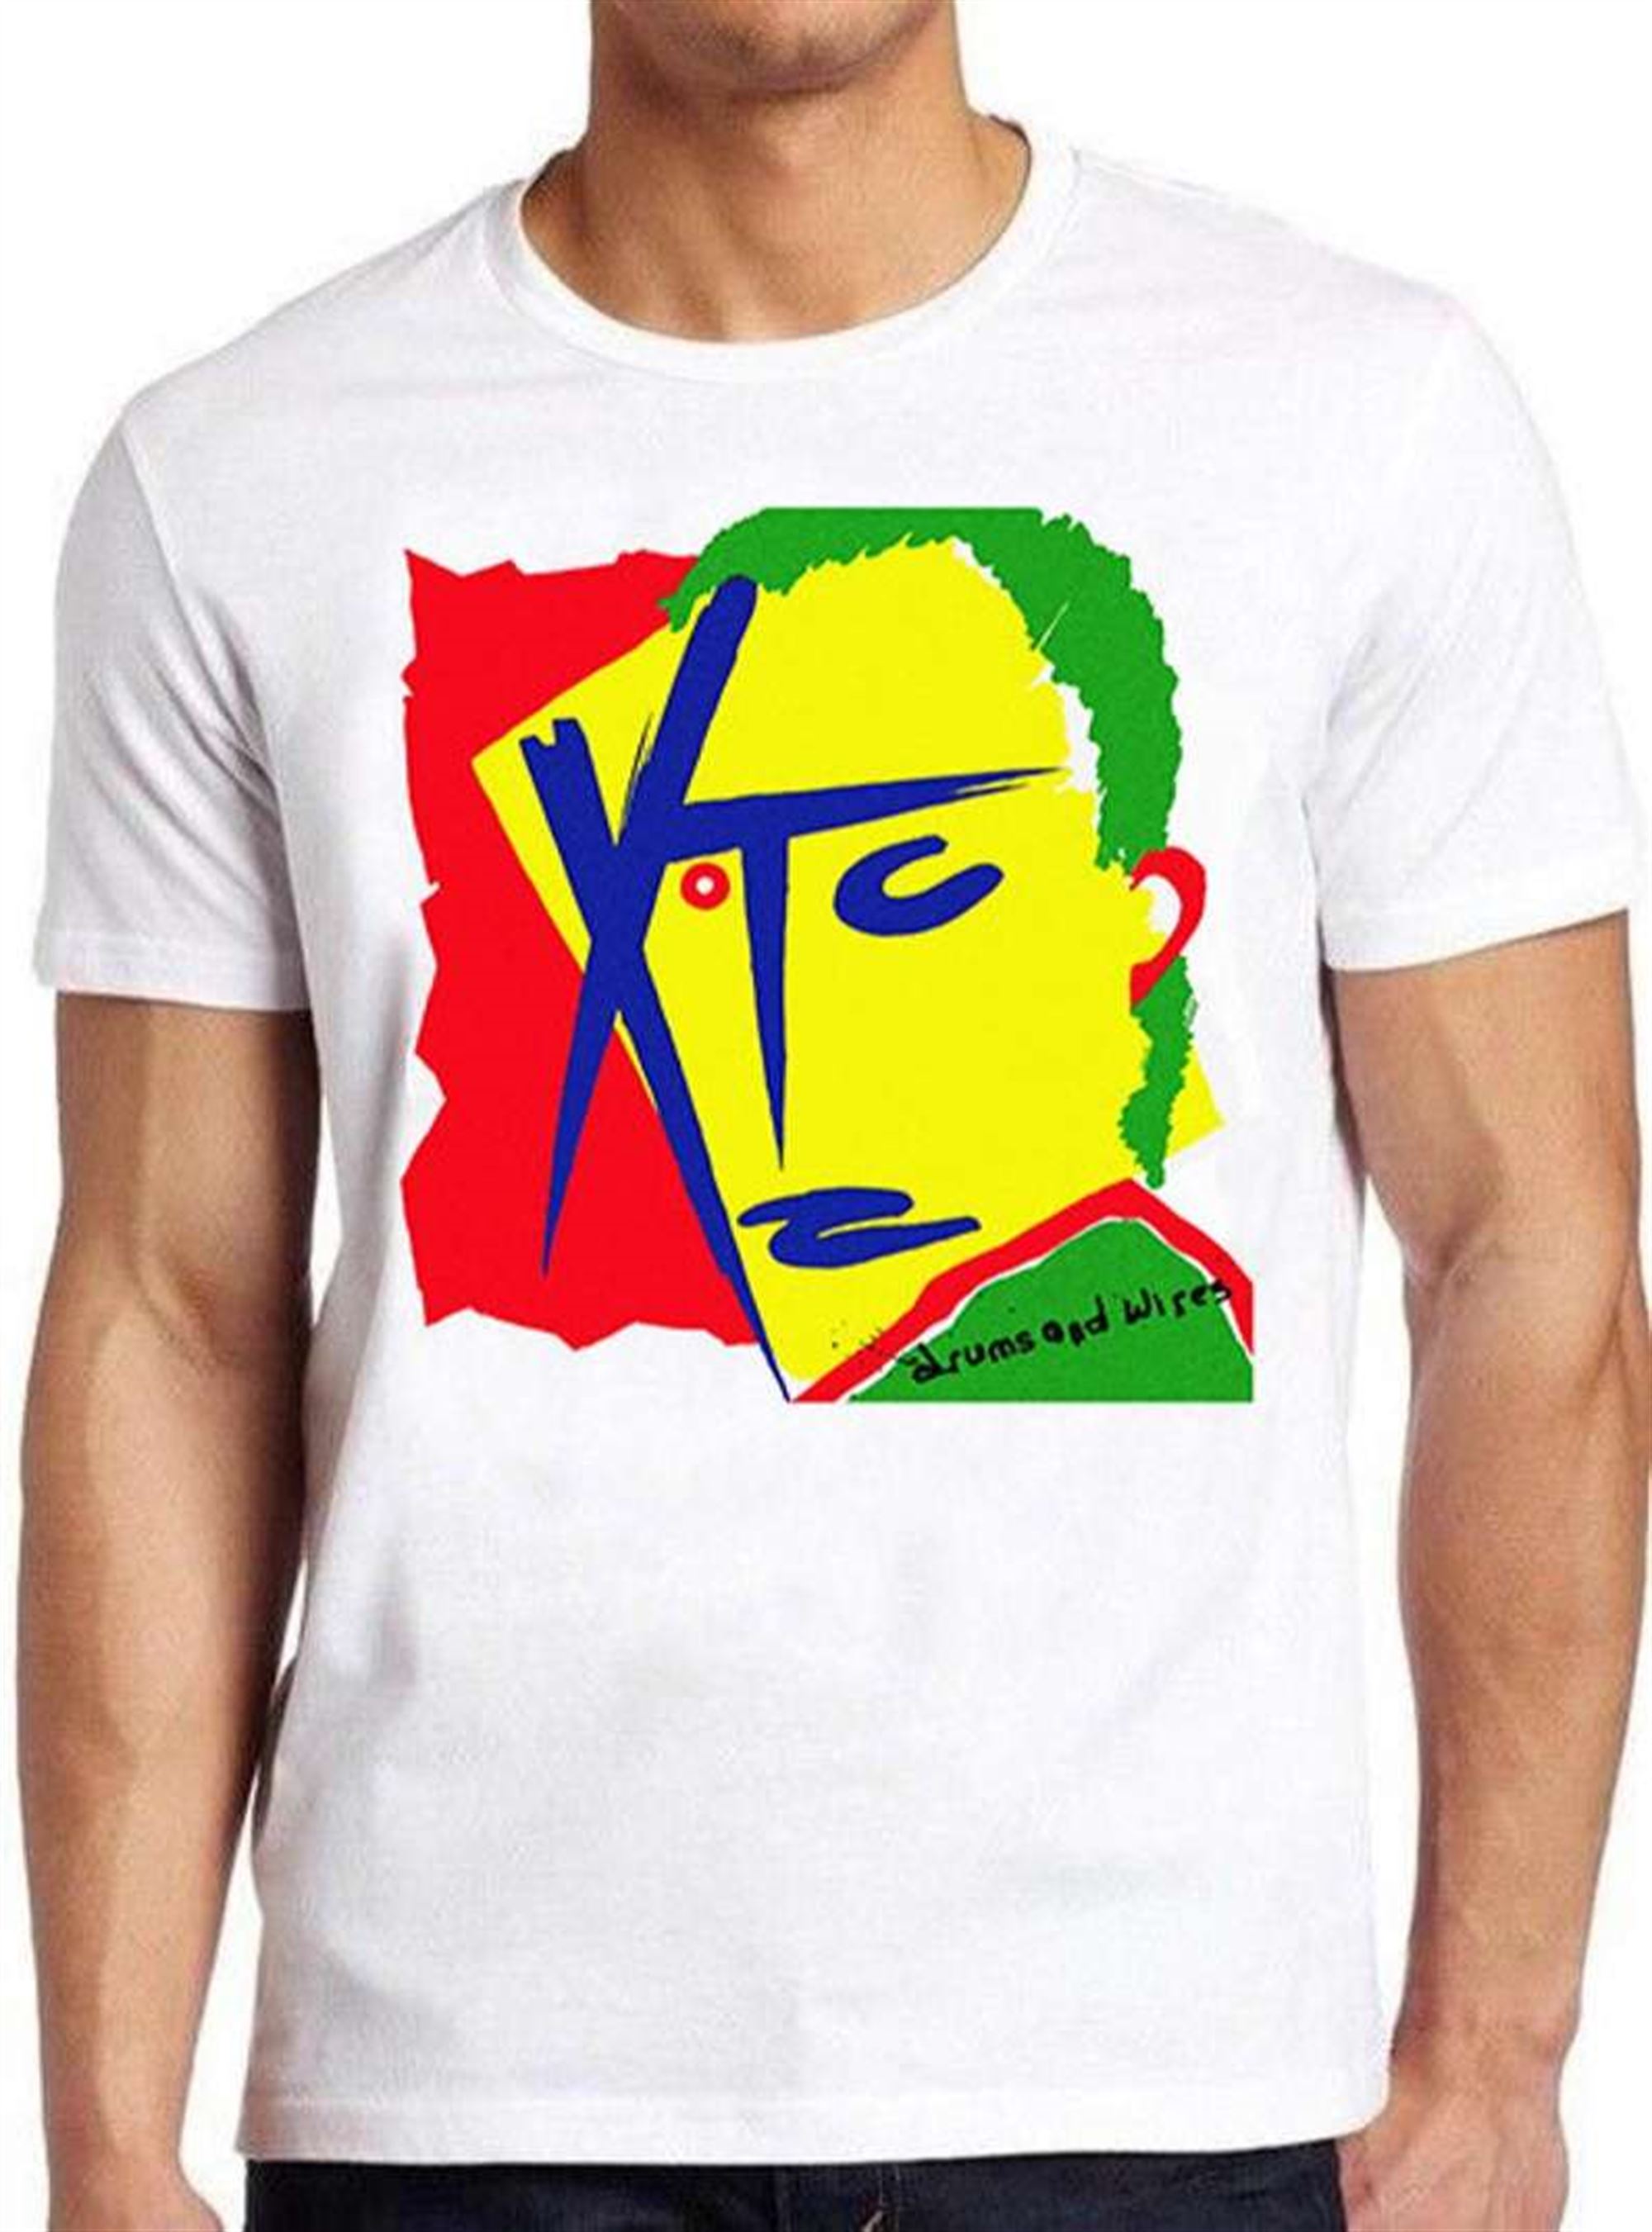 Xtc Drums And Wires T Shirt Plus Size Up To 5xl